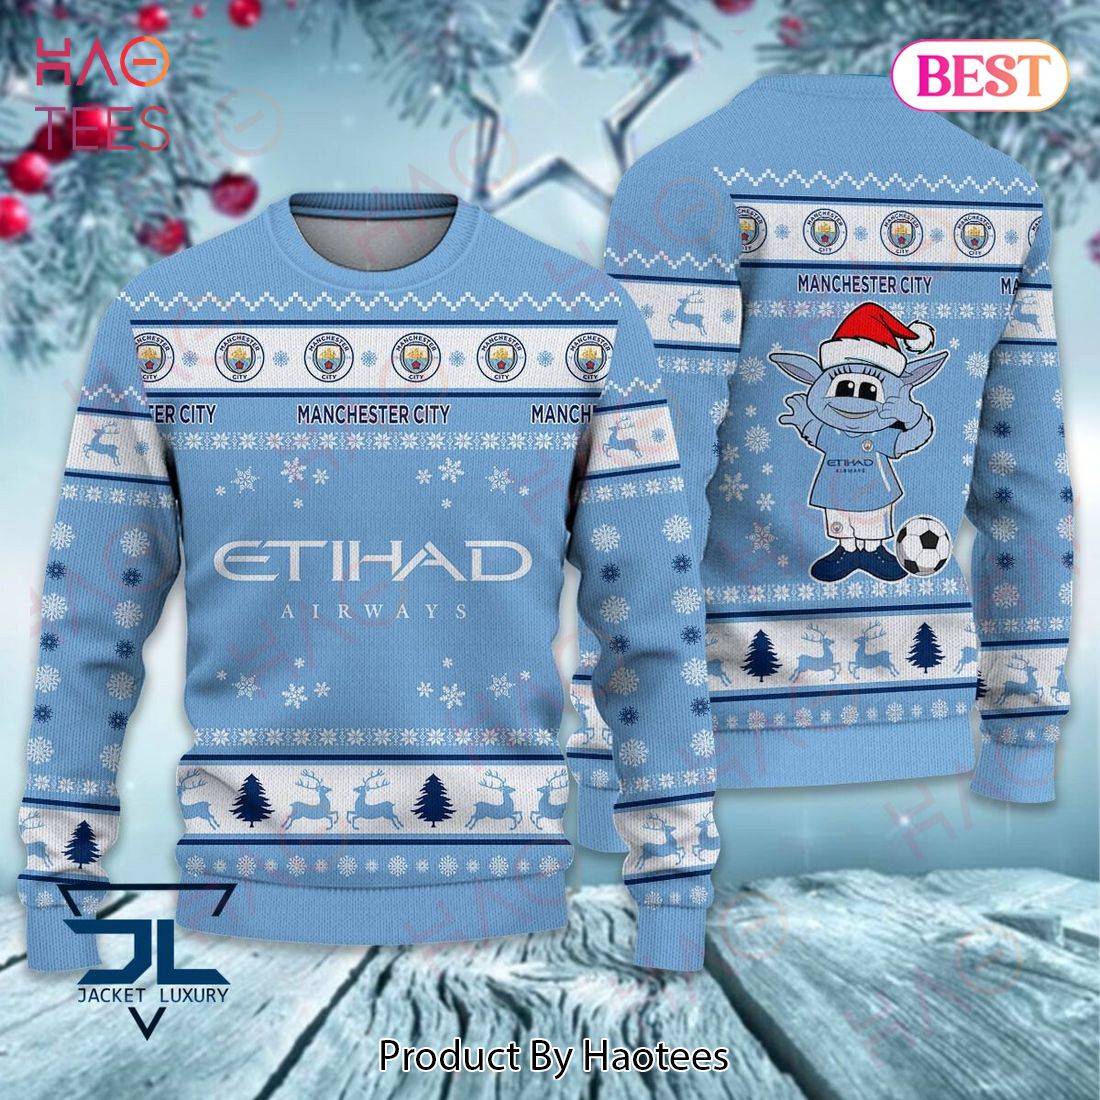 NEW Manchester City F.C Luxury Brand Sweater Limited Edition